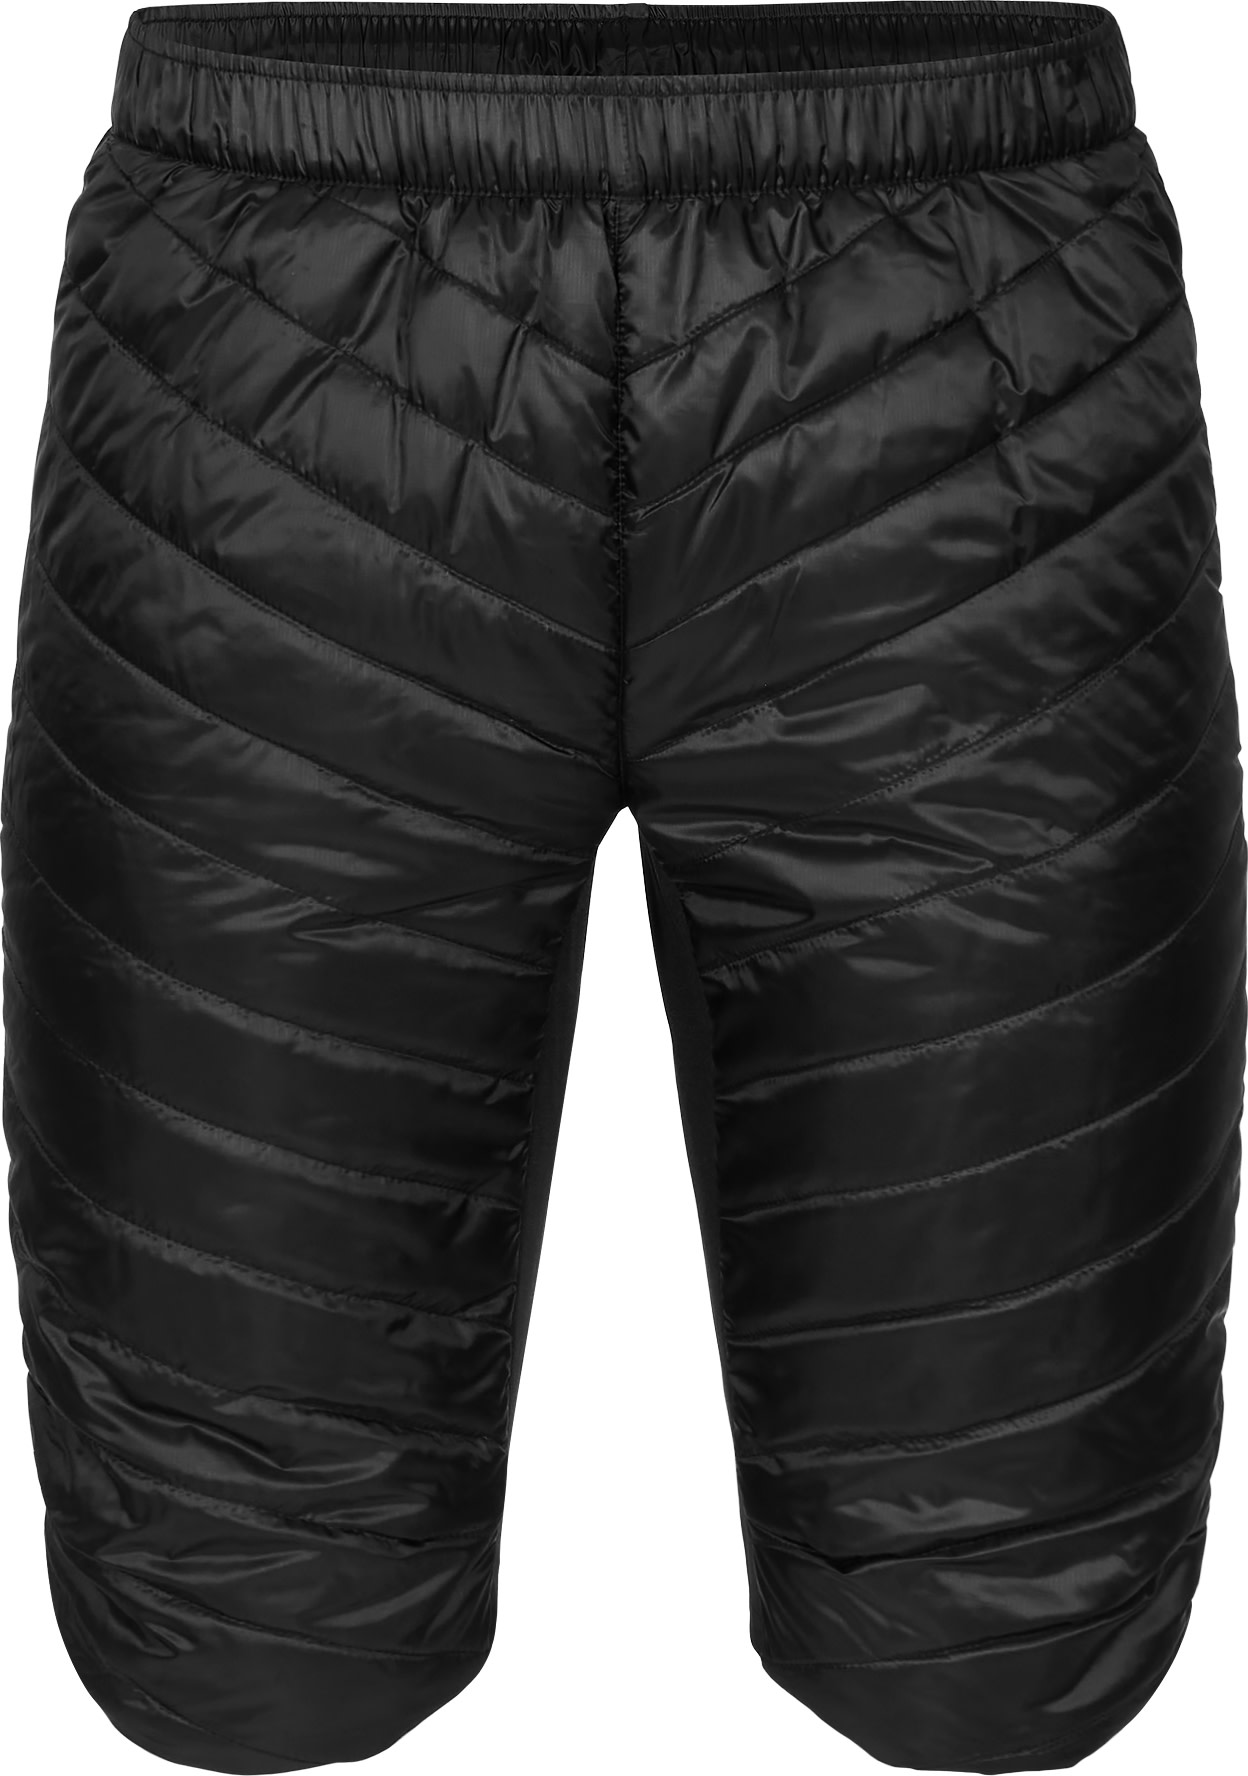 Men\'s Stretch Padded Over Short Black beauty | Buy Men\'s Stretch Padded  Over Short Black beauty here | Outnorth